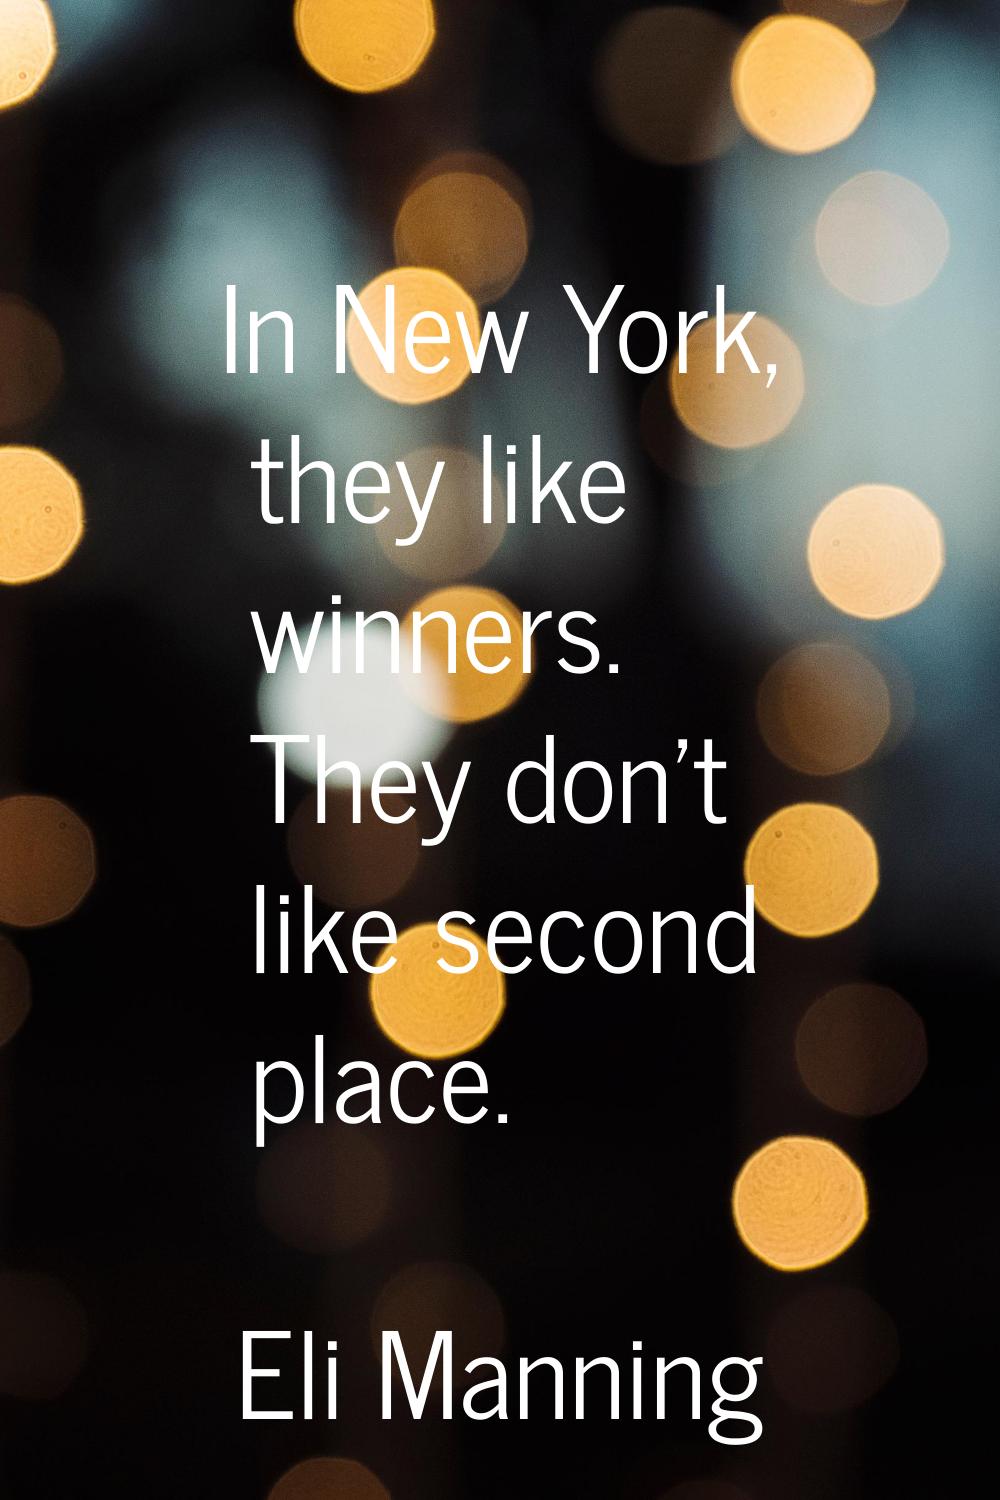 In New York, they like winners. They don't like second place.